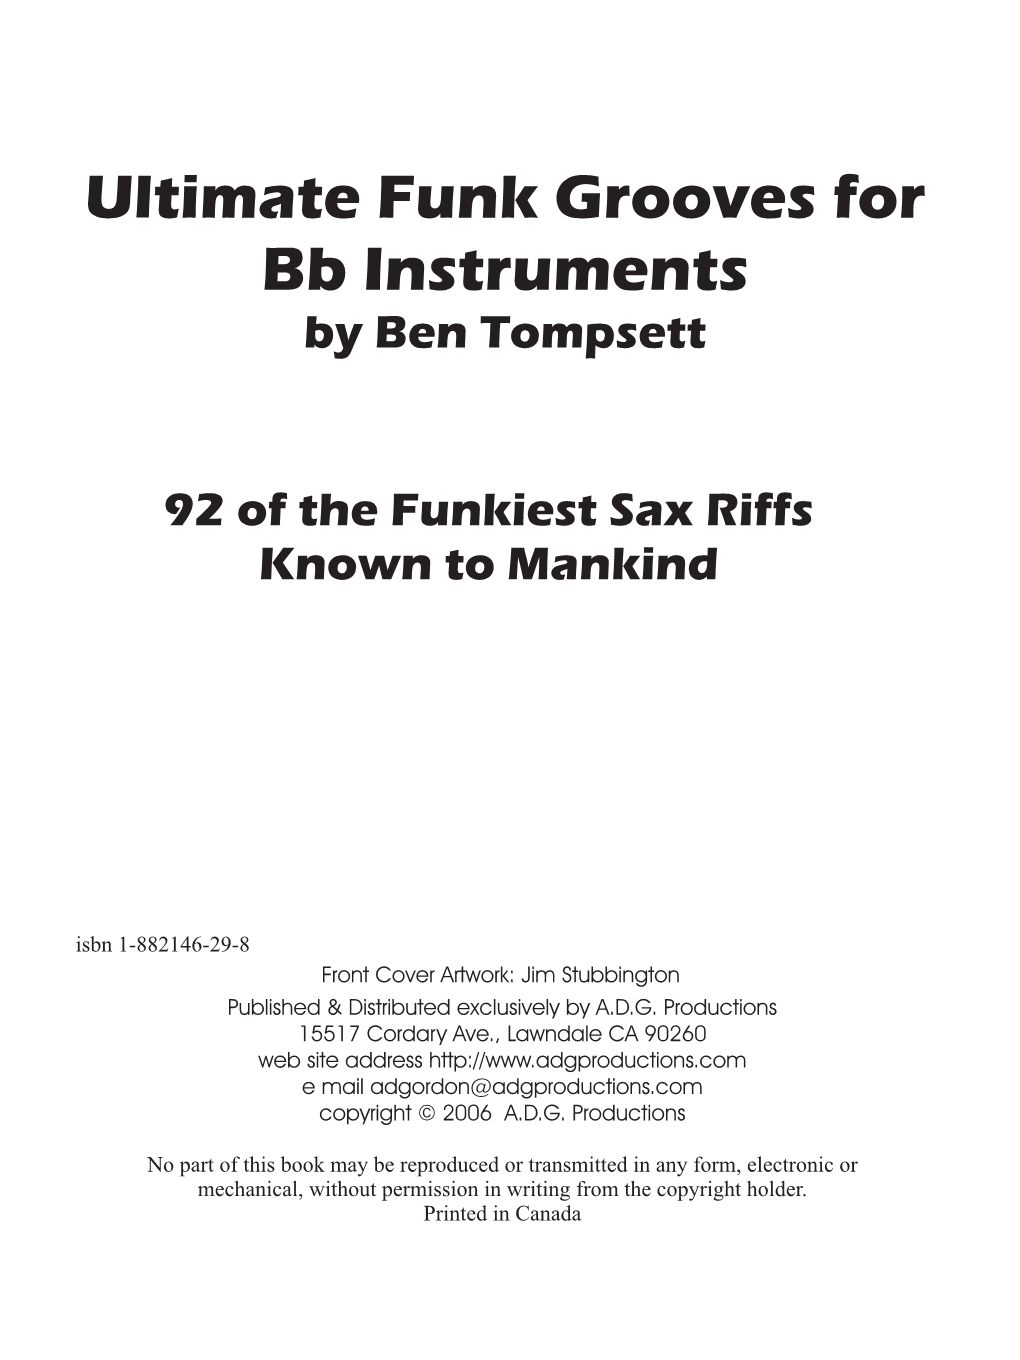 Ultimate Funk Grooves for Bb Instruments by Ben Tompsett